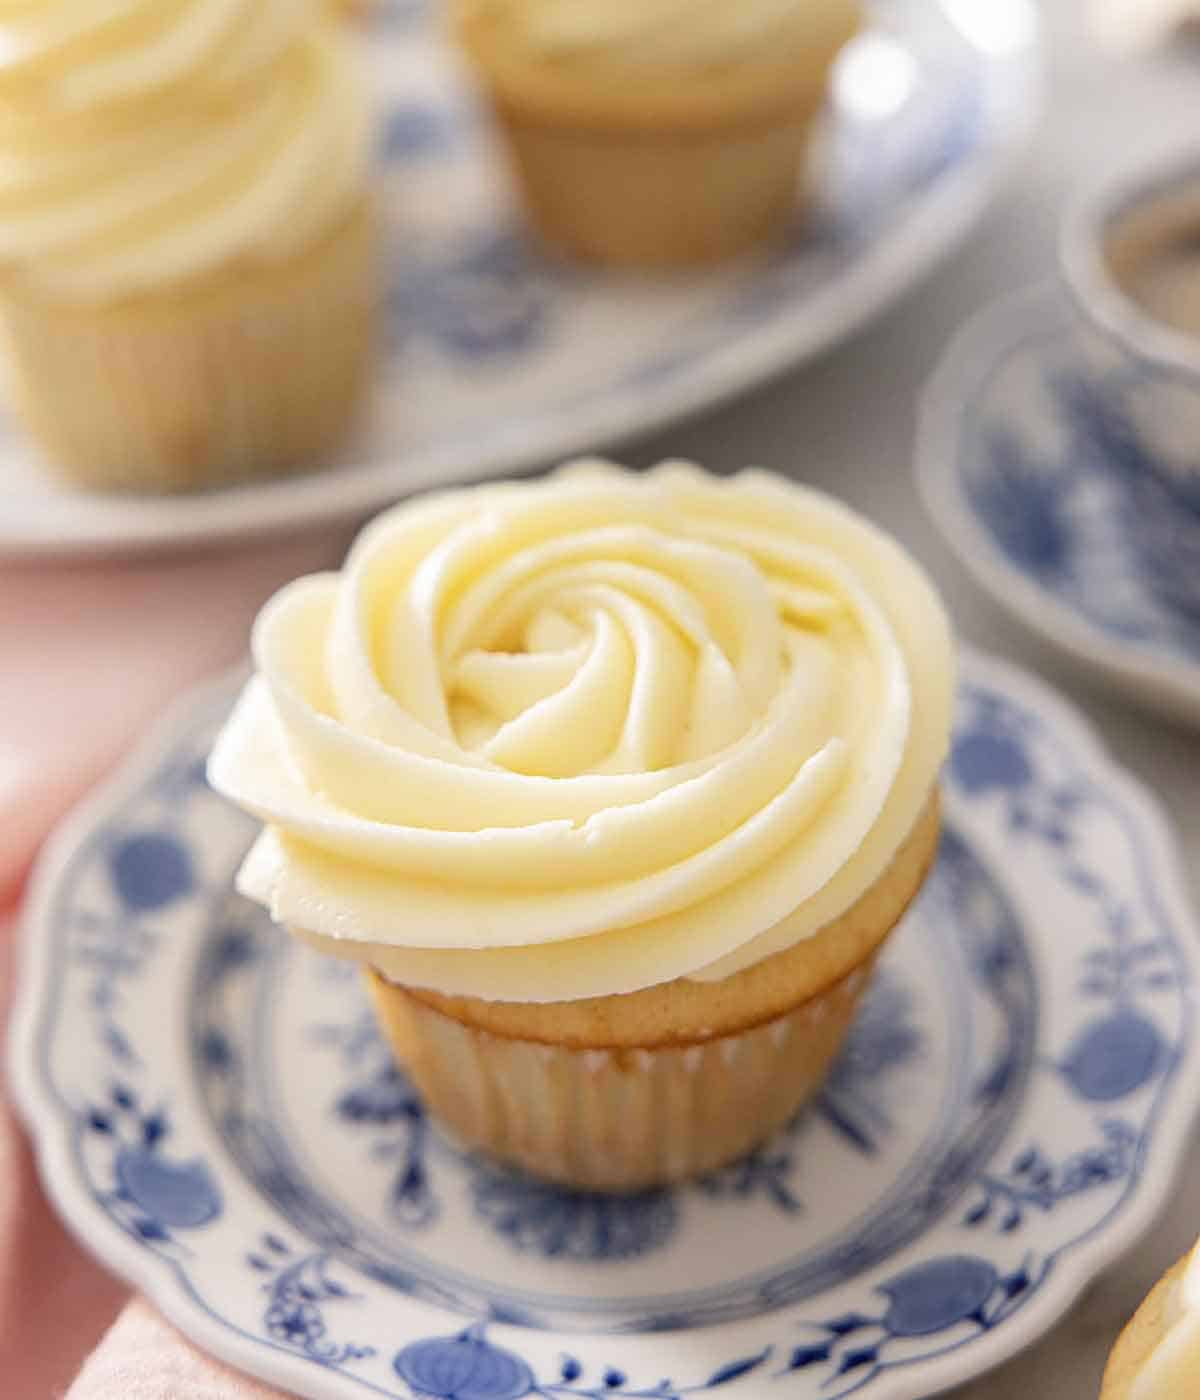 A cupcake with cream cheese frosting piped on top.